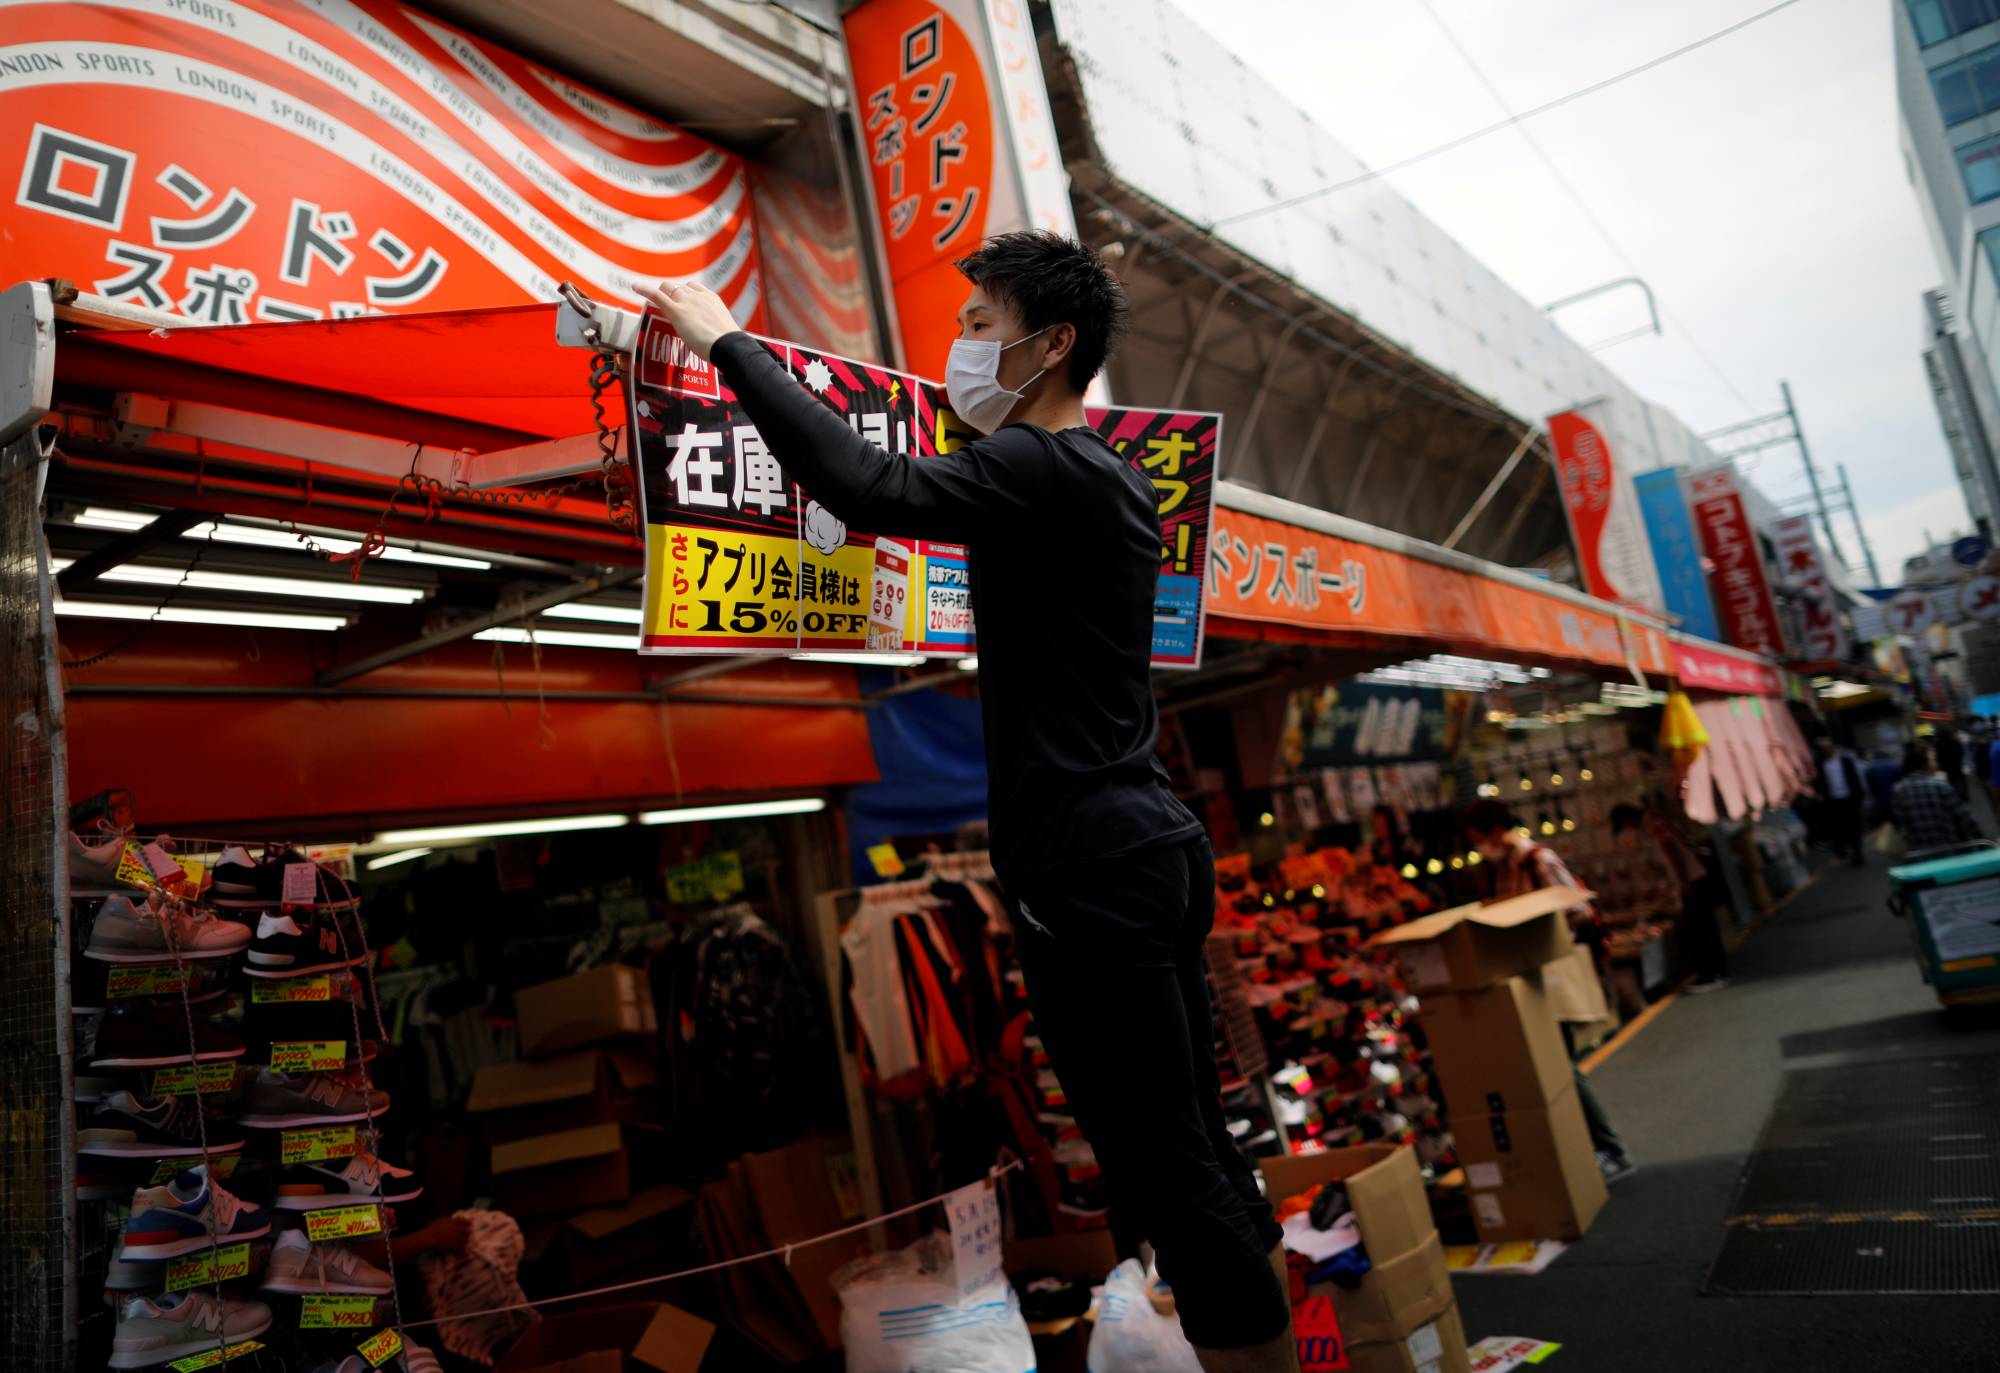 Back to business: An employee of a shoes shop prepares to reopen their business during the spread of COVID-19 in Tokyo. | REUTERS